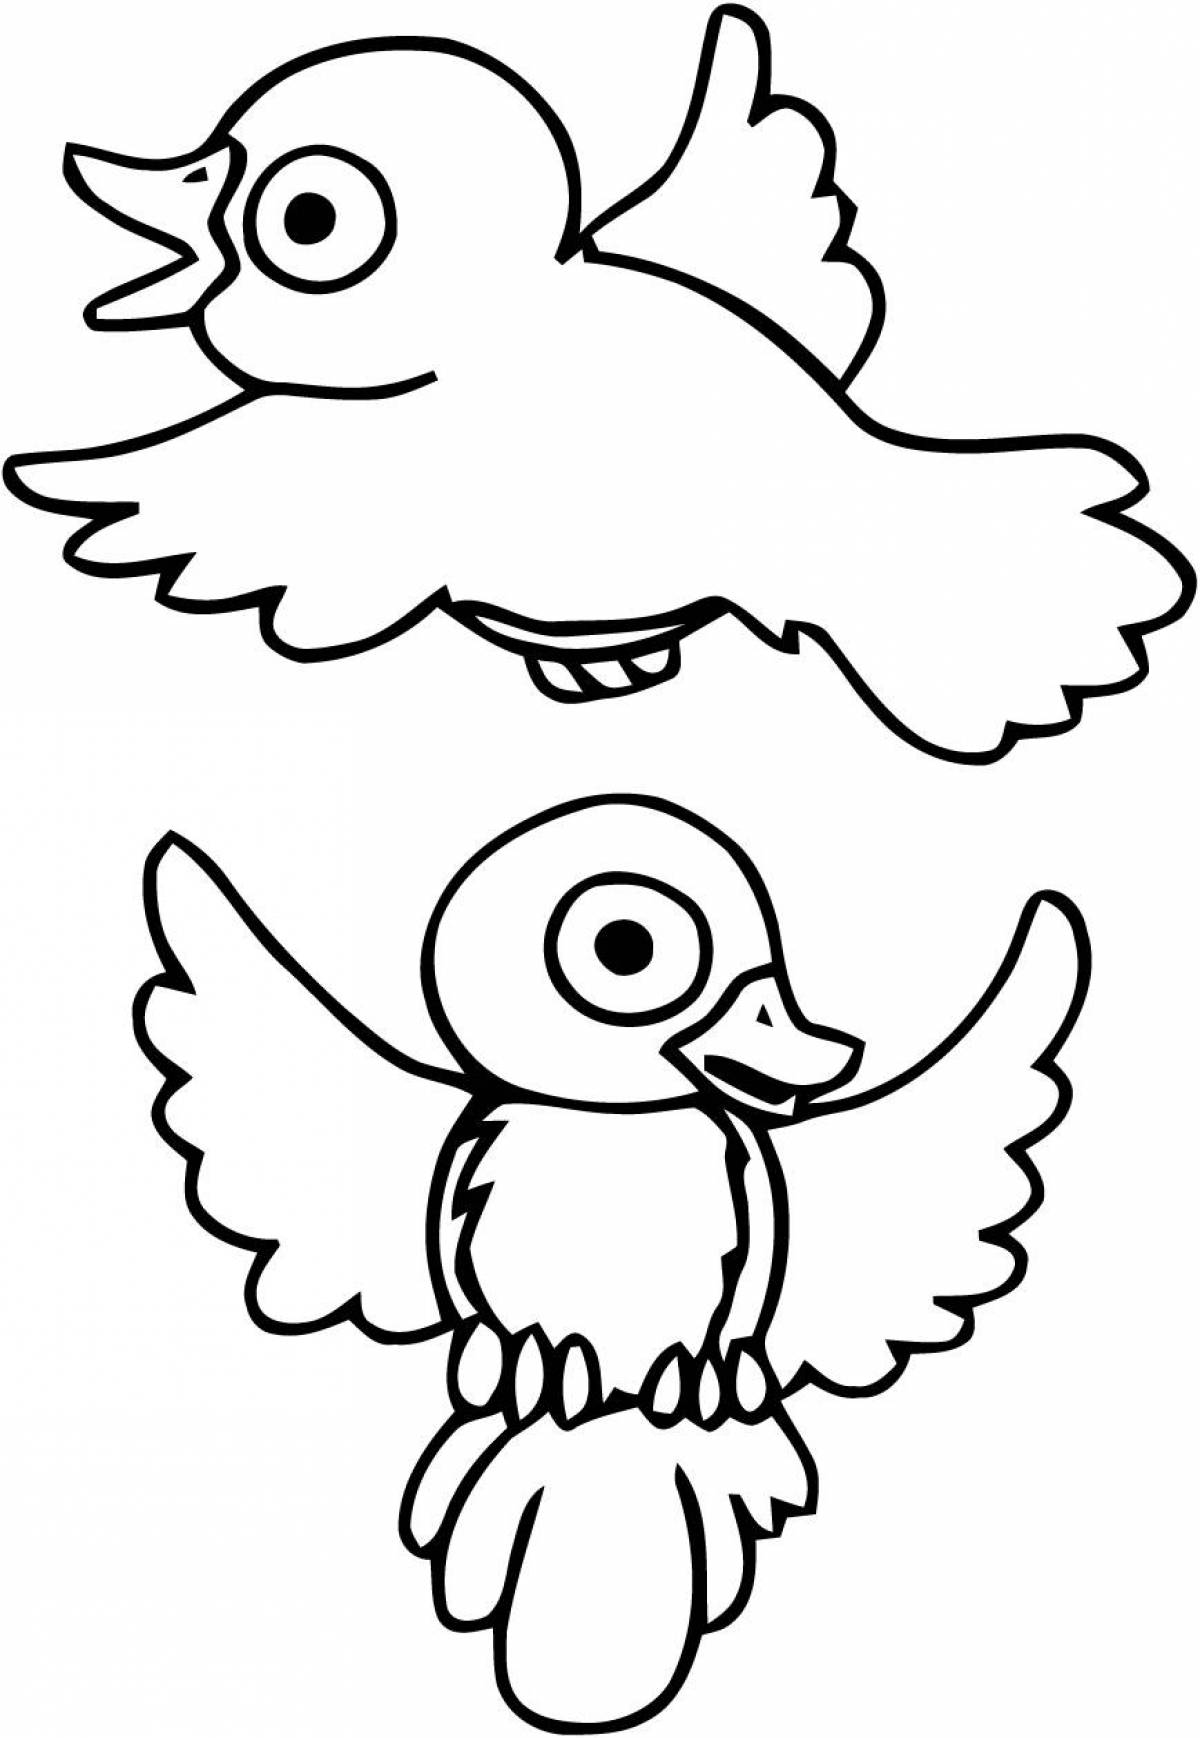 Outstanding bird coloring page for 3-4 year olds